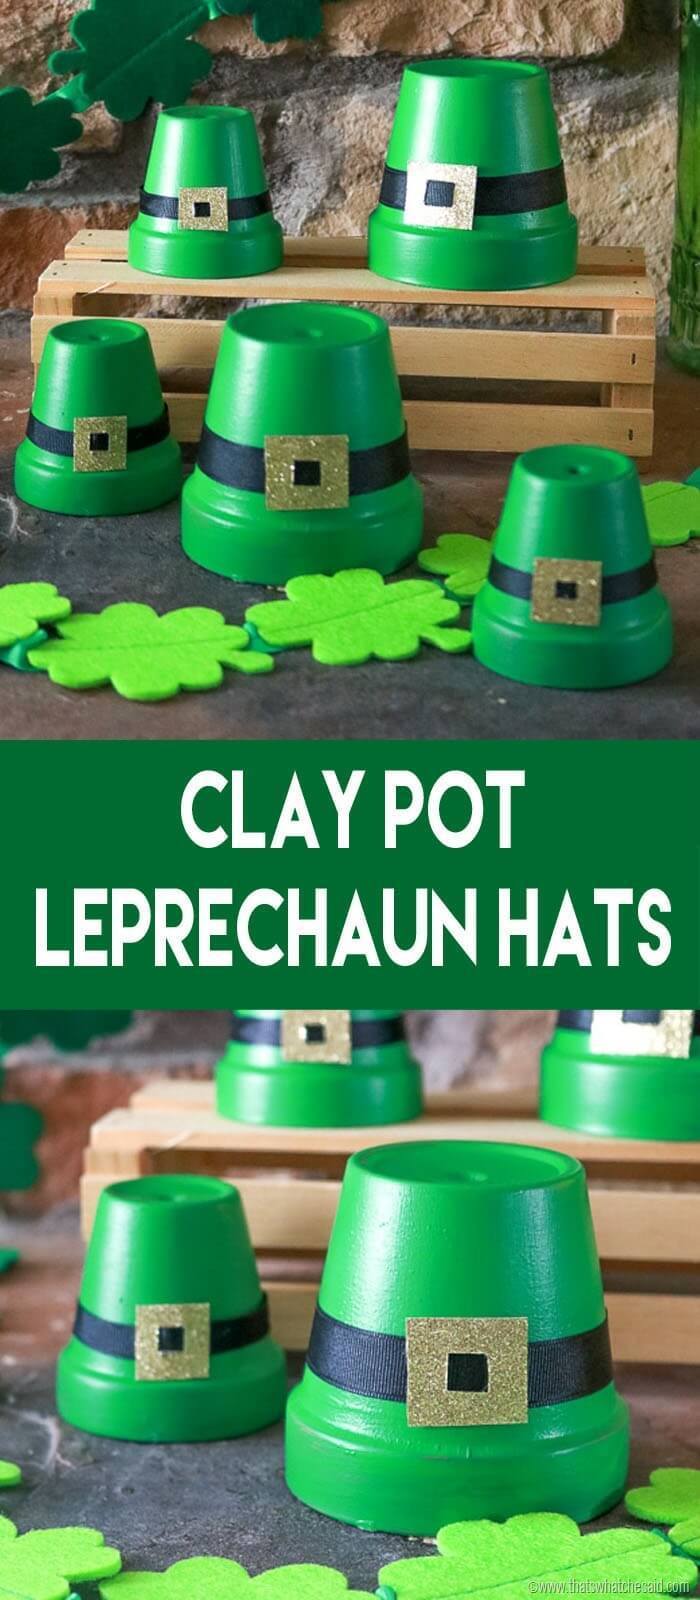 15 Masterful DIY St. Patrick's Day Decor Projects You Must Craft